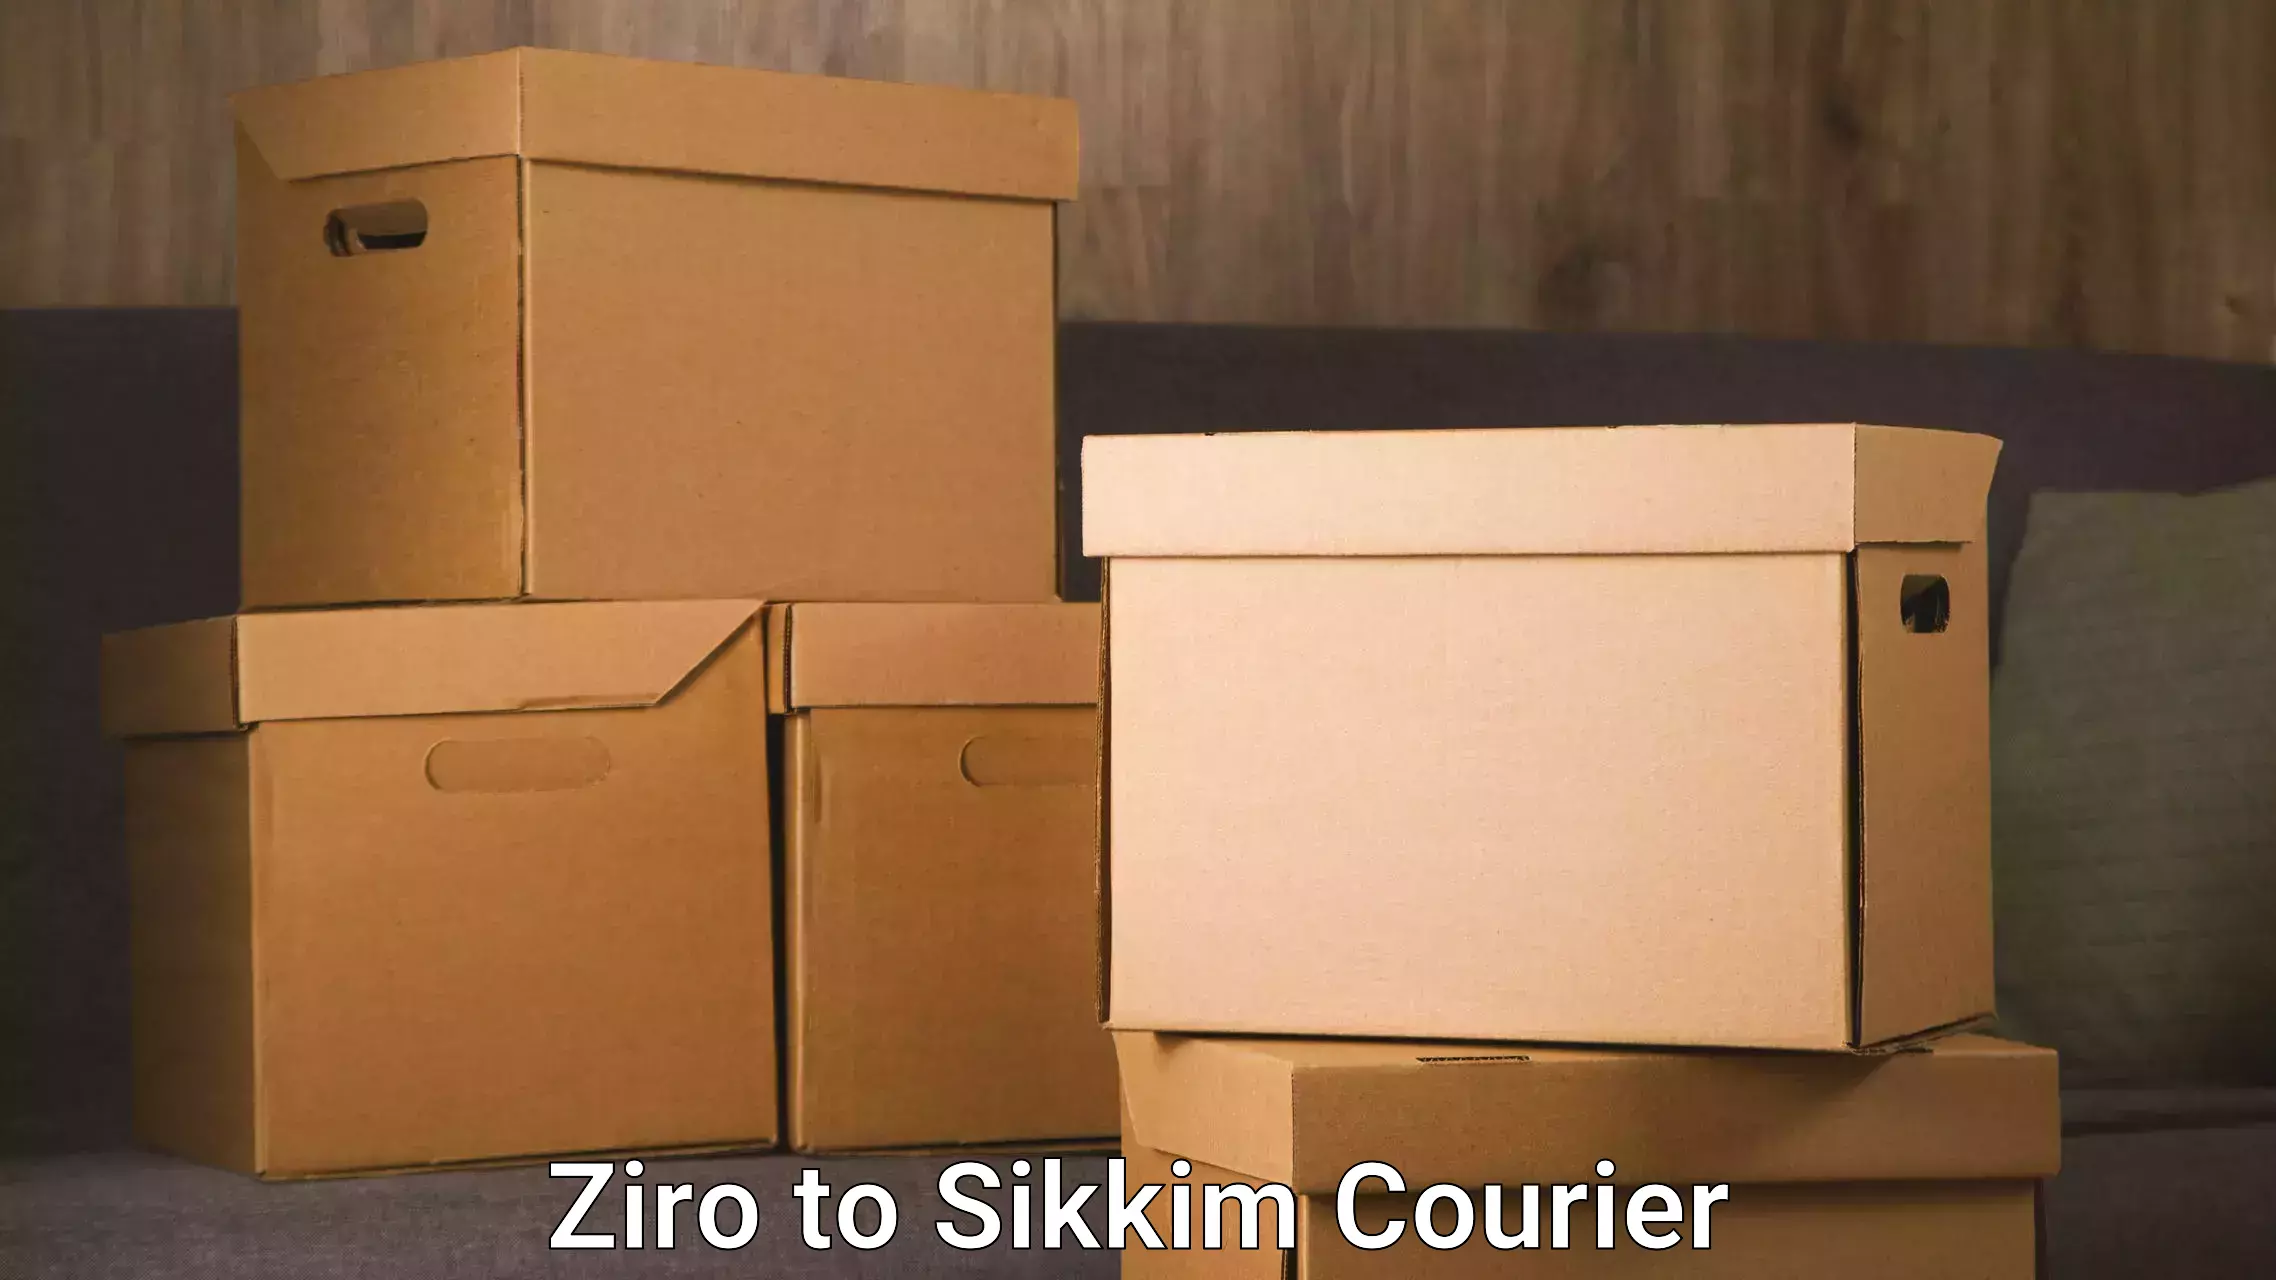 Nationwide courier service Ziro to Pelling